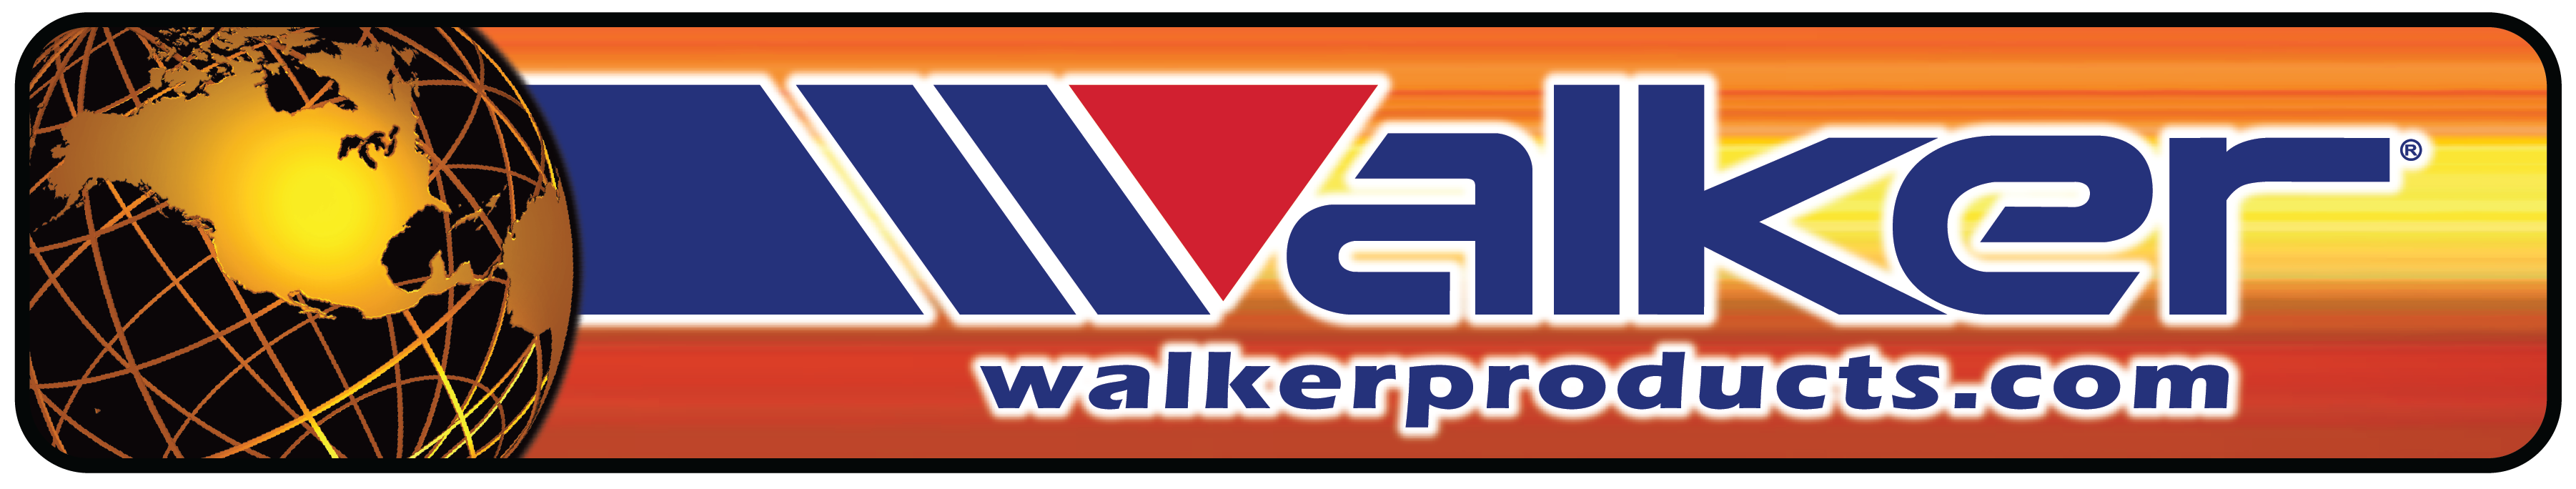 Product Categories - Walker Products